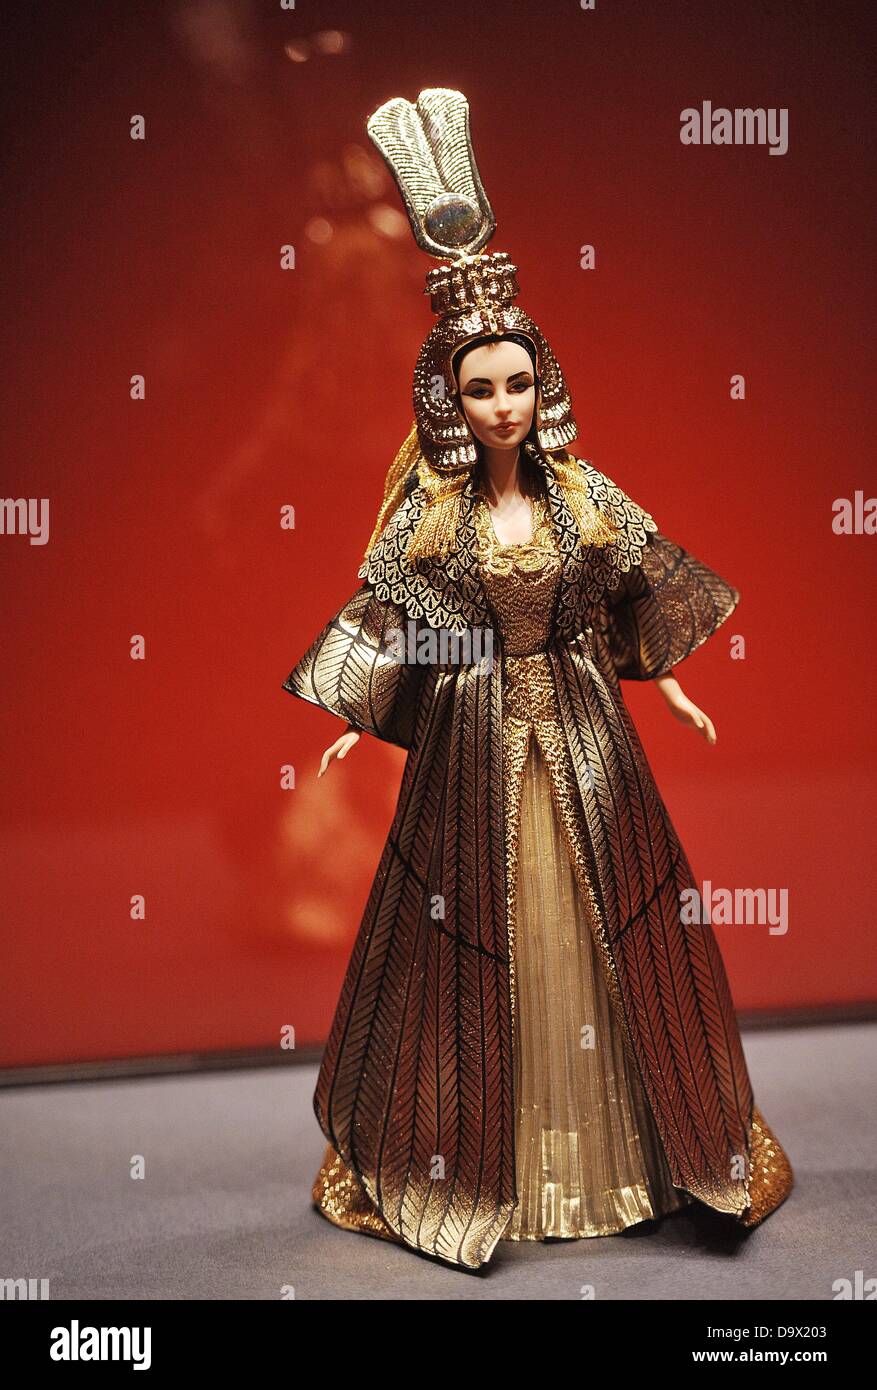 A Barbie figure of Elizabeth Taylor in her role as Cleopatra stands in the exhibiton 'Cleopatra - The eternal diva' in the Art and exhibition hall of the Federal Republic of Germany in Bonn, Germany, 27 June 2013. The exhibition runs from 28 June to 06 October 2013. Photo: HENNING KAISER Stock Photo